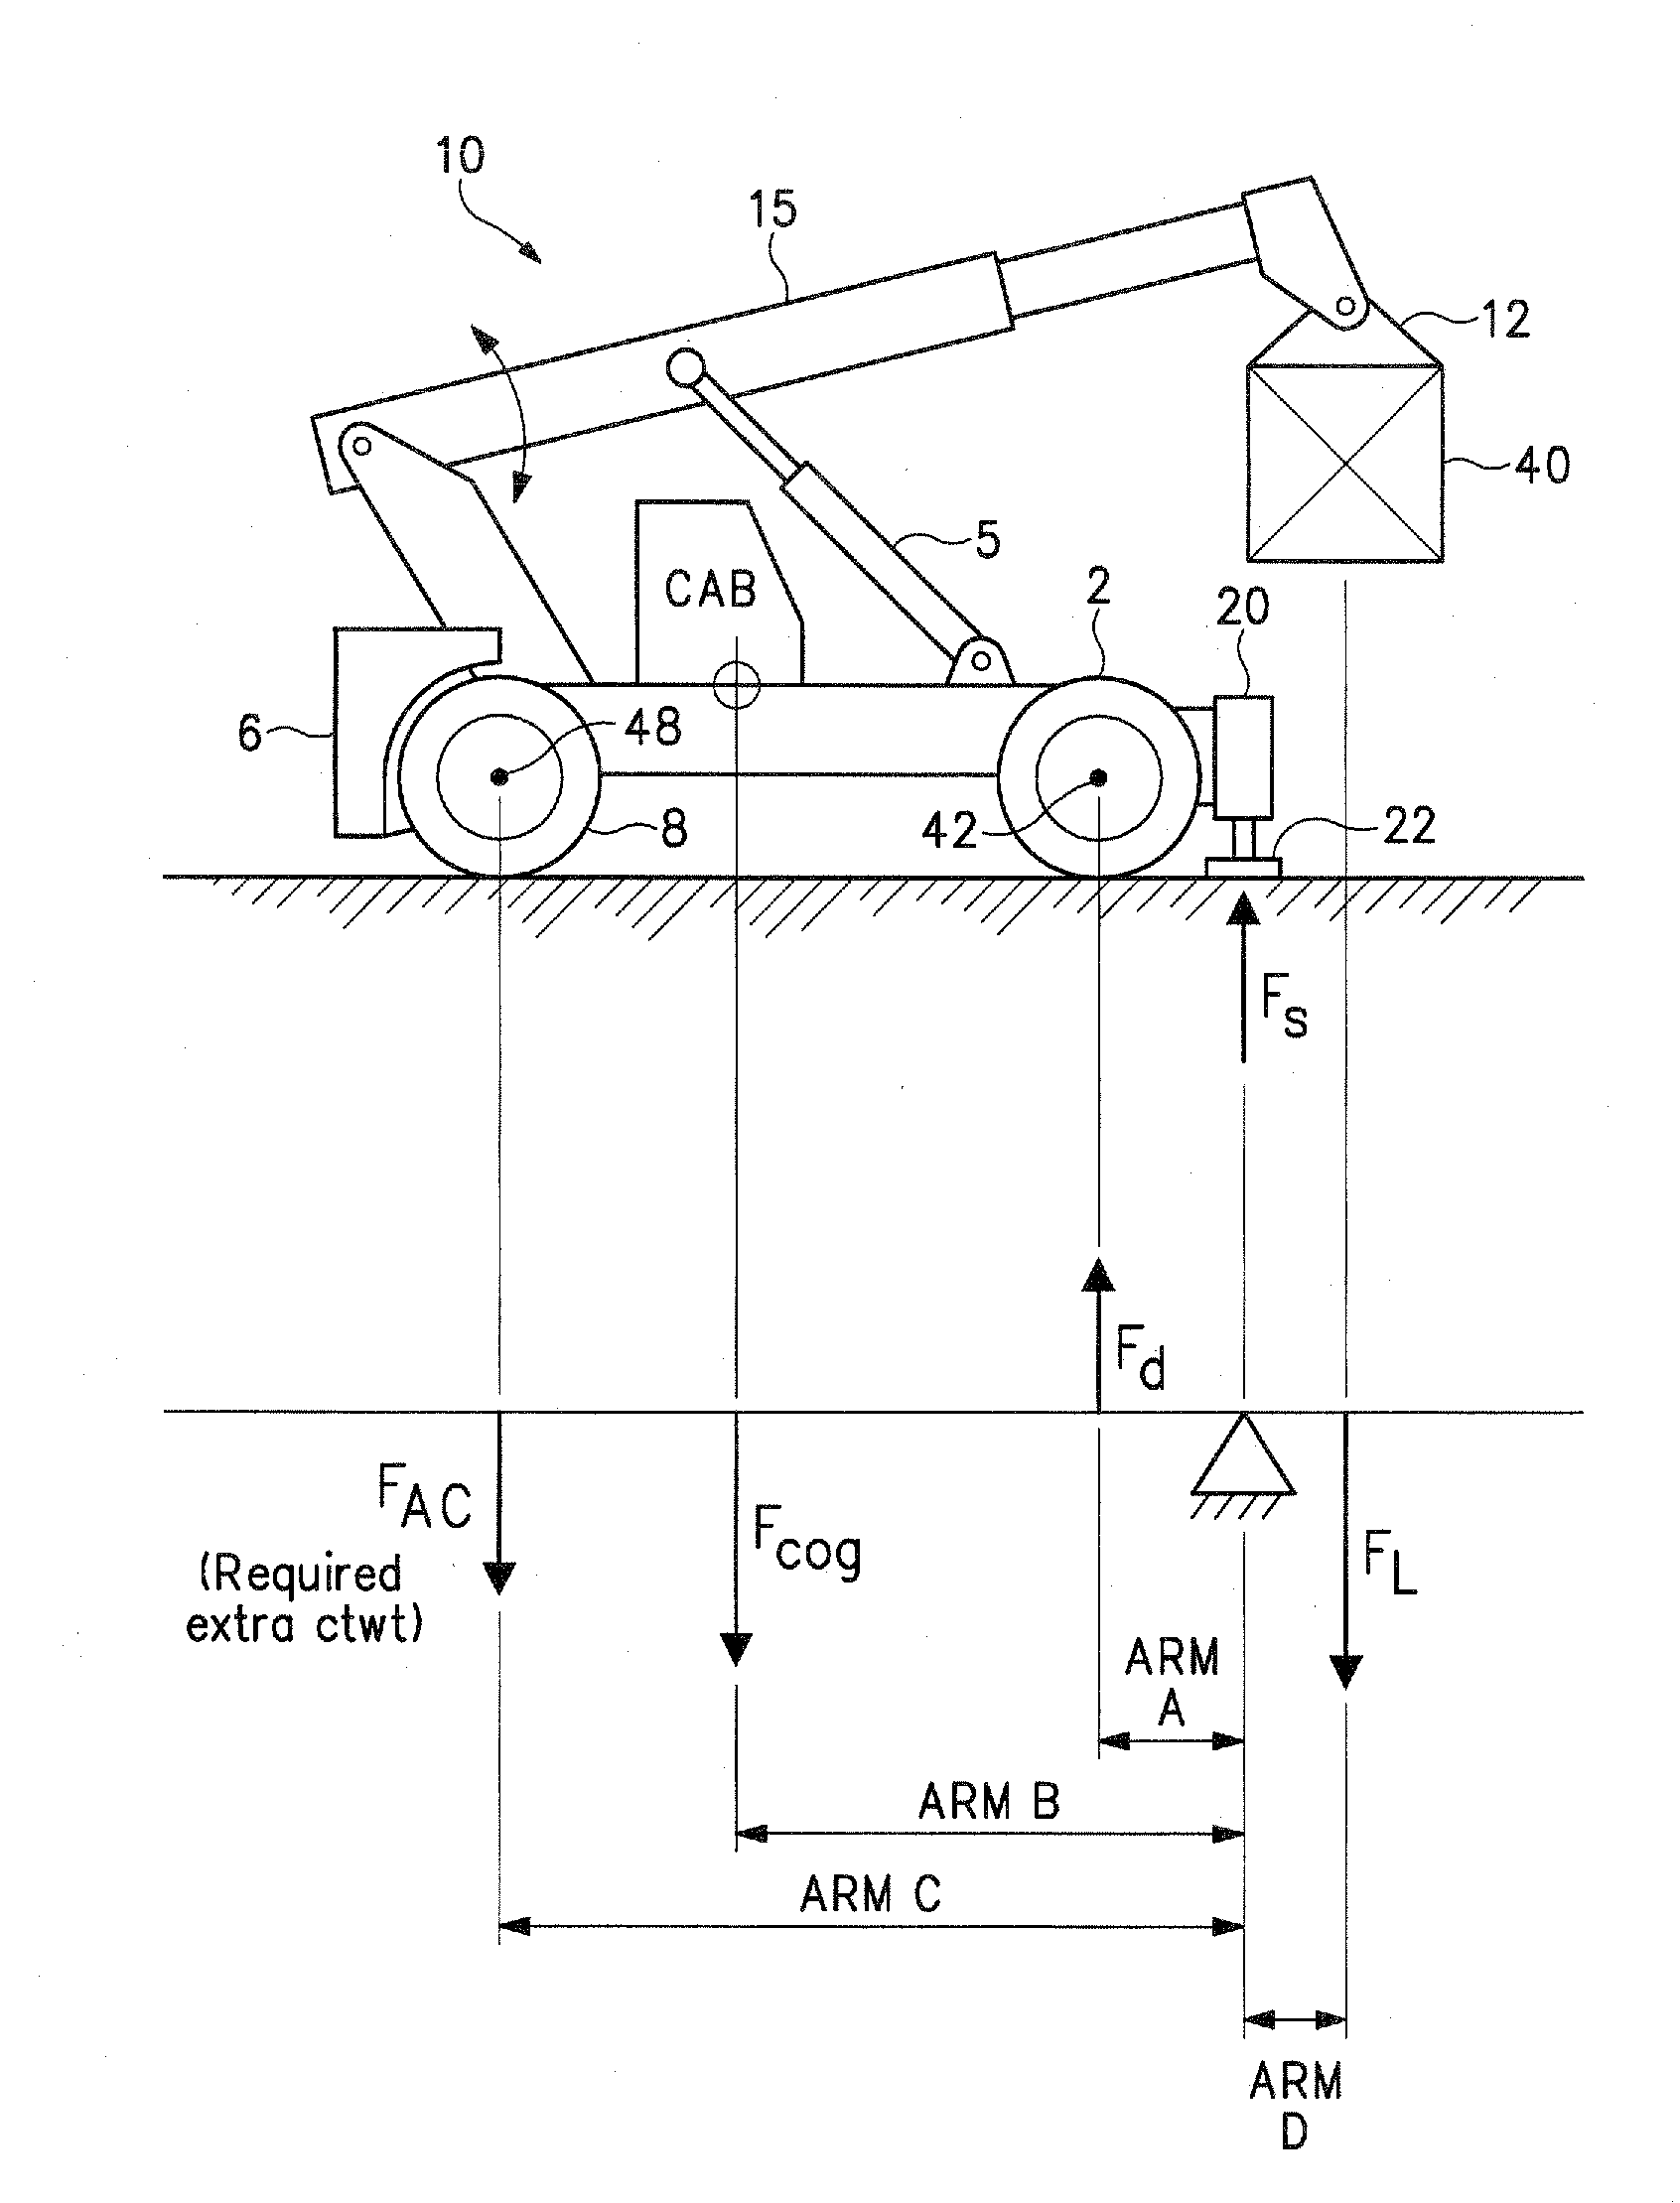 Load controlled stabilizer system